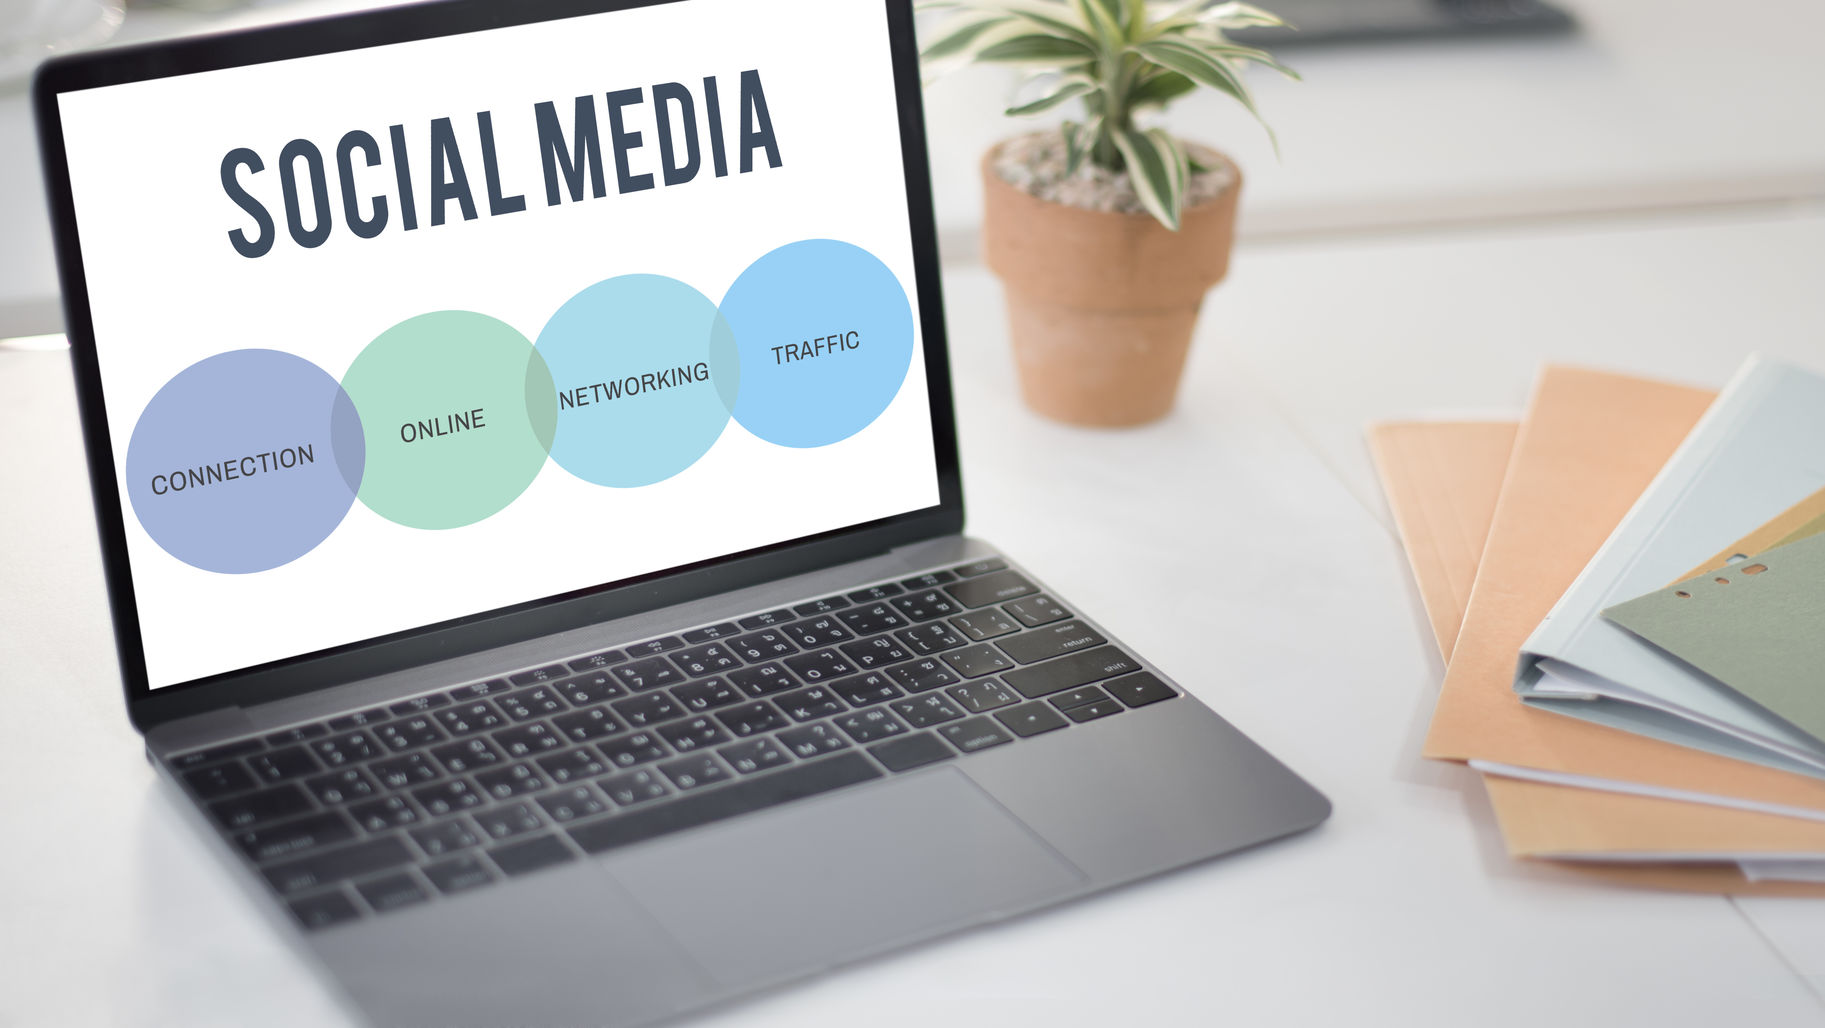 Top tips and tricks for conducting an effective social media audit